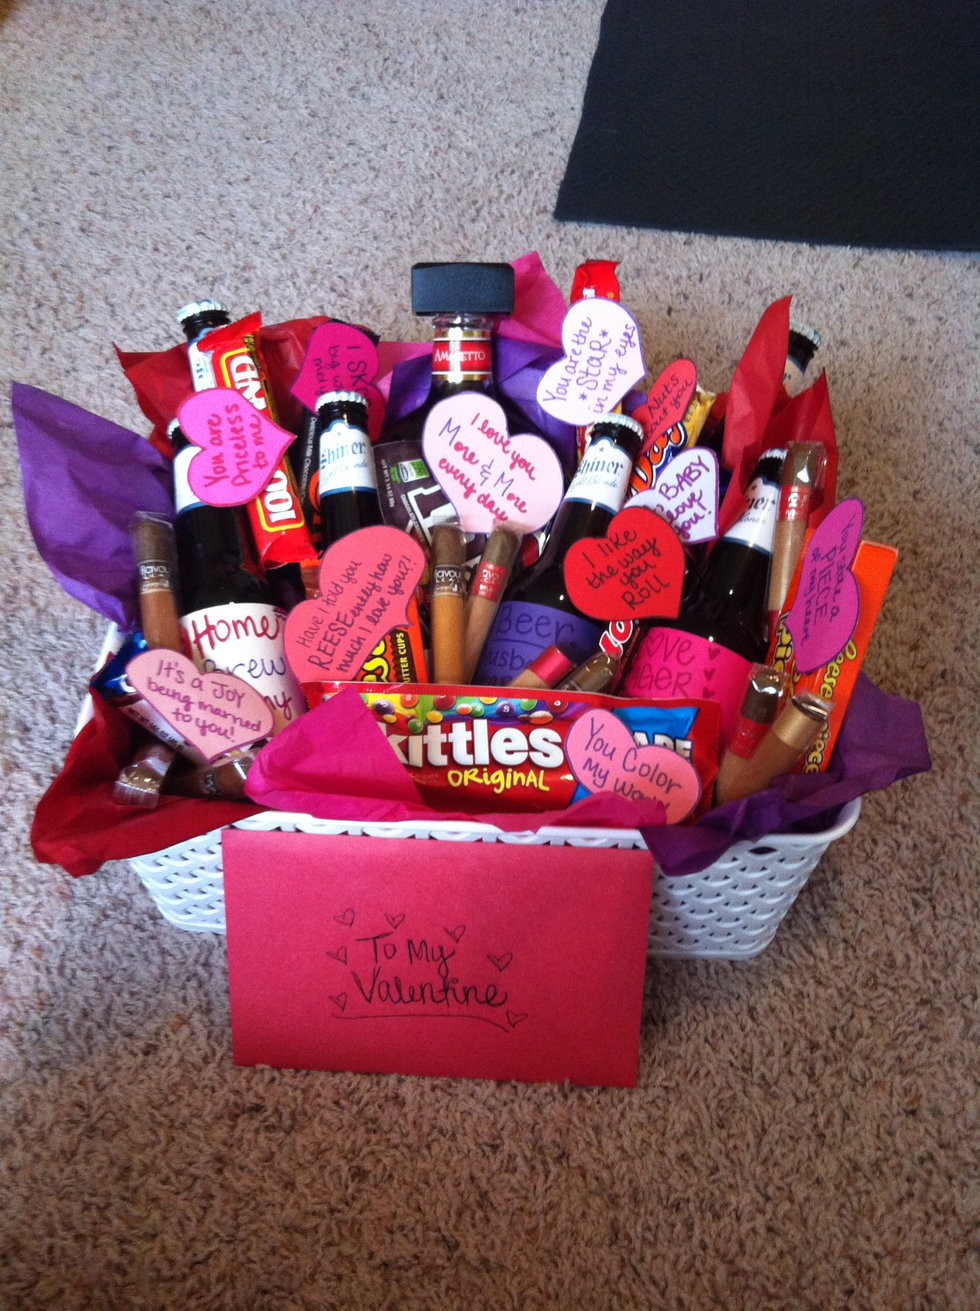 Homemade Valentine Gift Basket Ideas
 6 Things You Should Be Getting Your Boo Valentine s Day